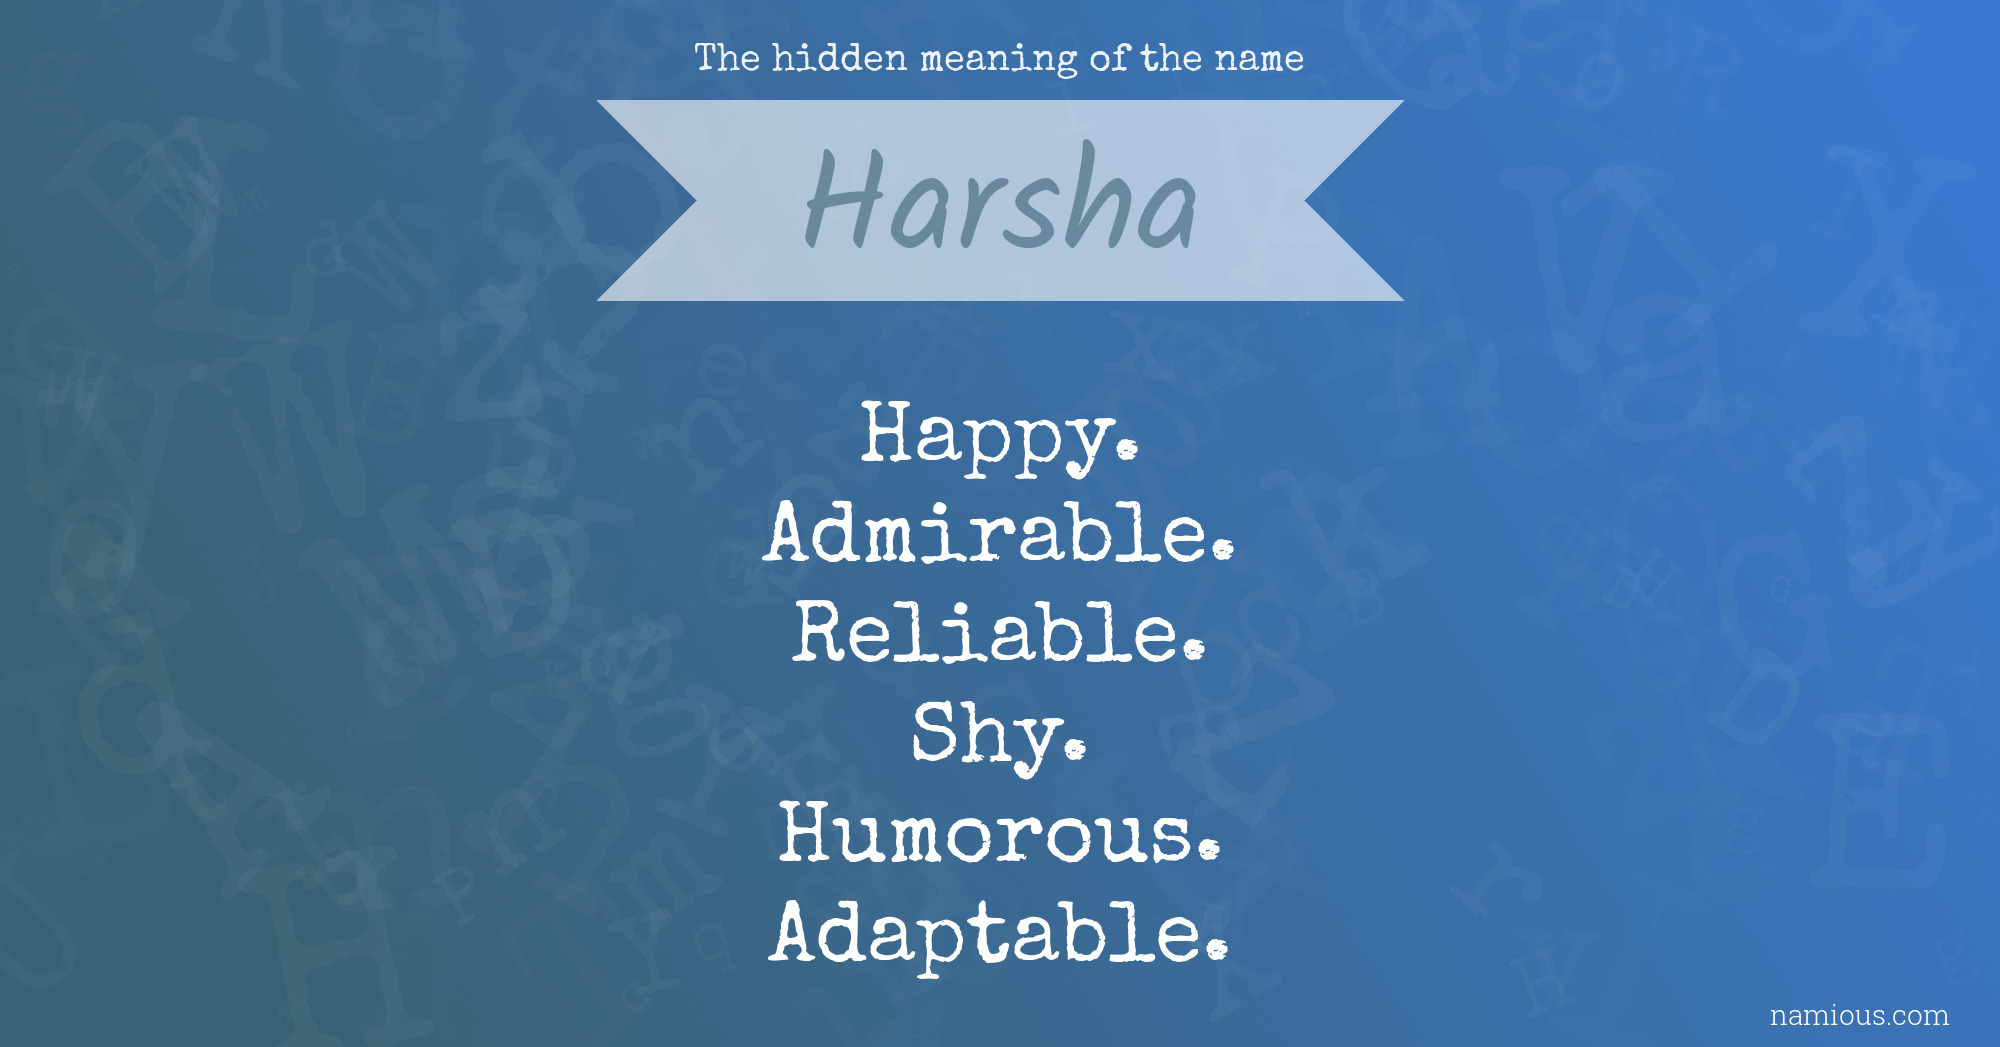 The Hidden Meaning Of The Name Harsha | Namious